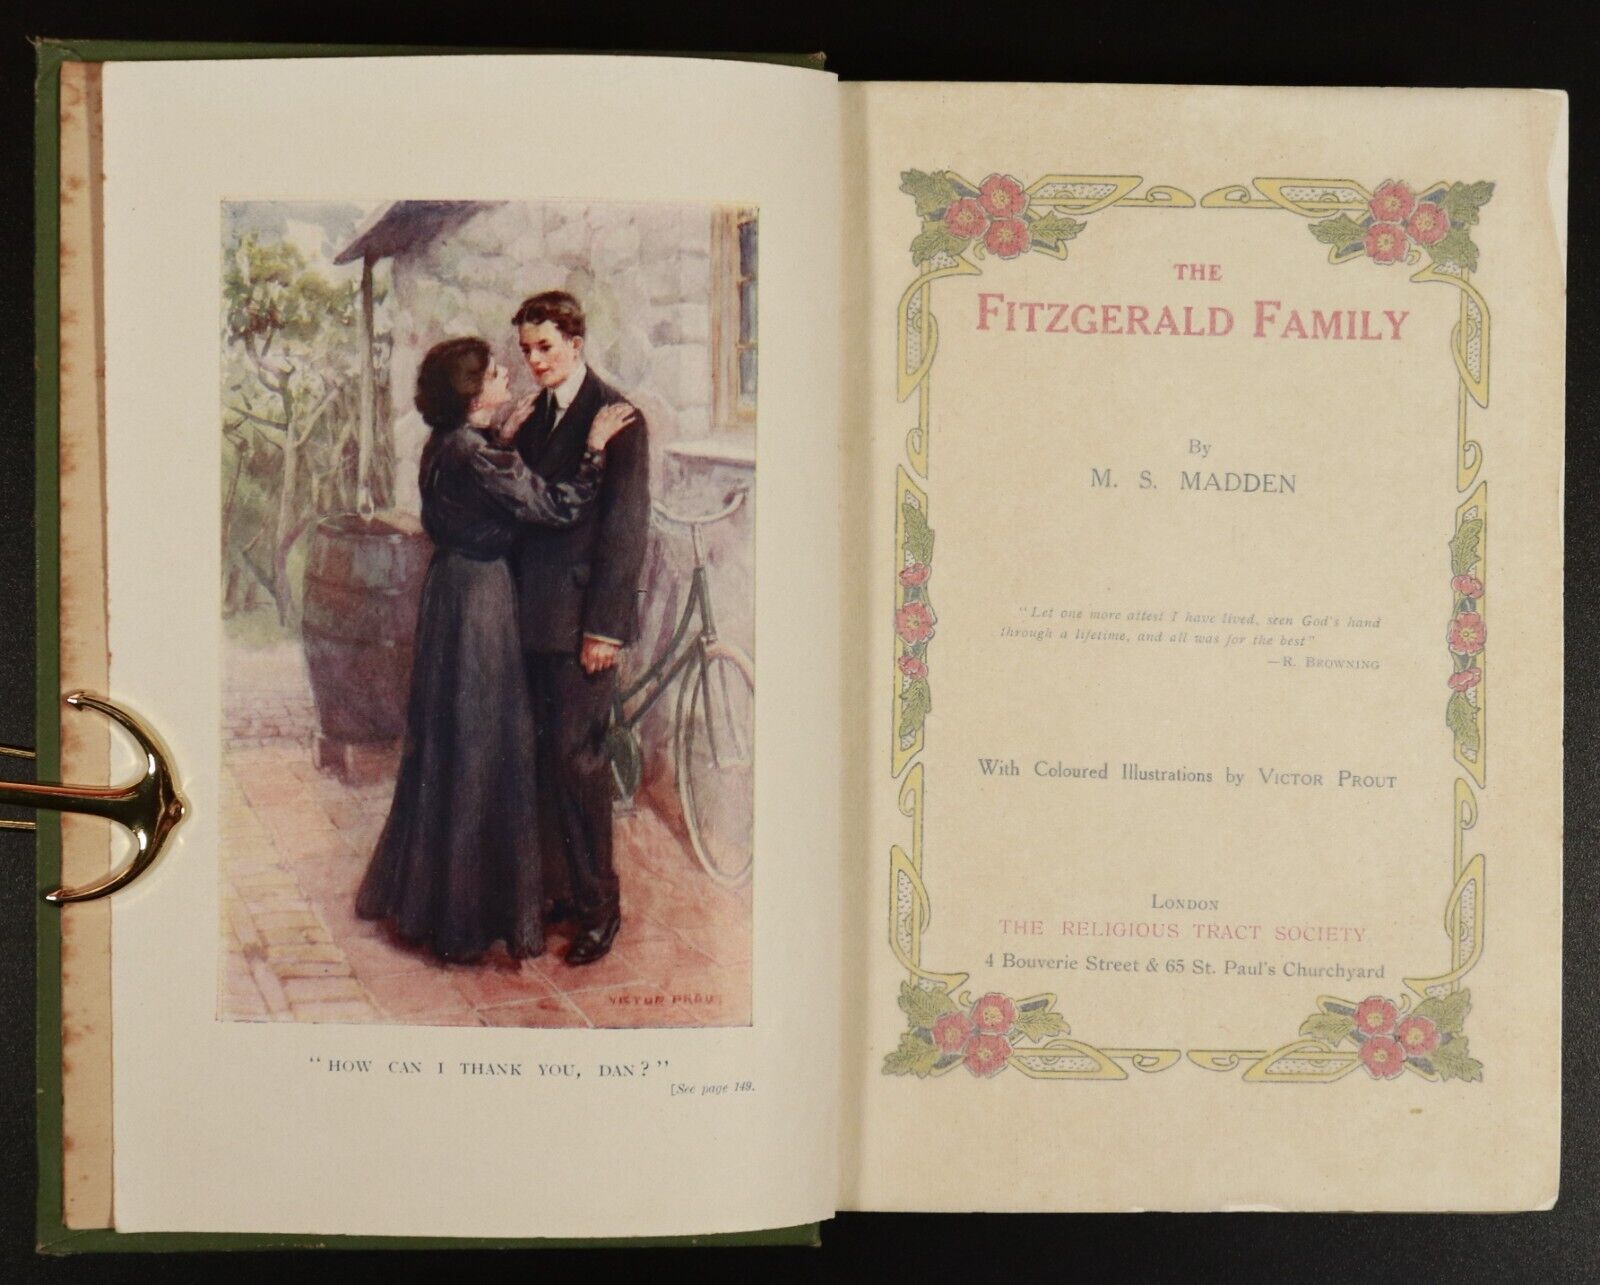 c1900 The Fitzgerald Family by M.S. Madden Antique British Fiction Book RTS - 0